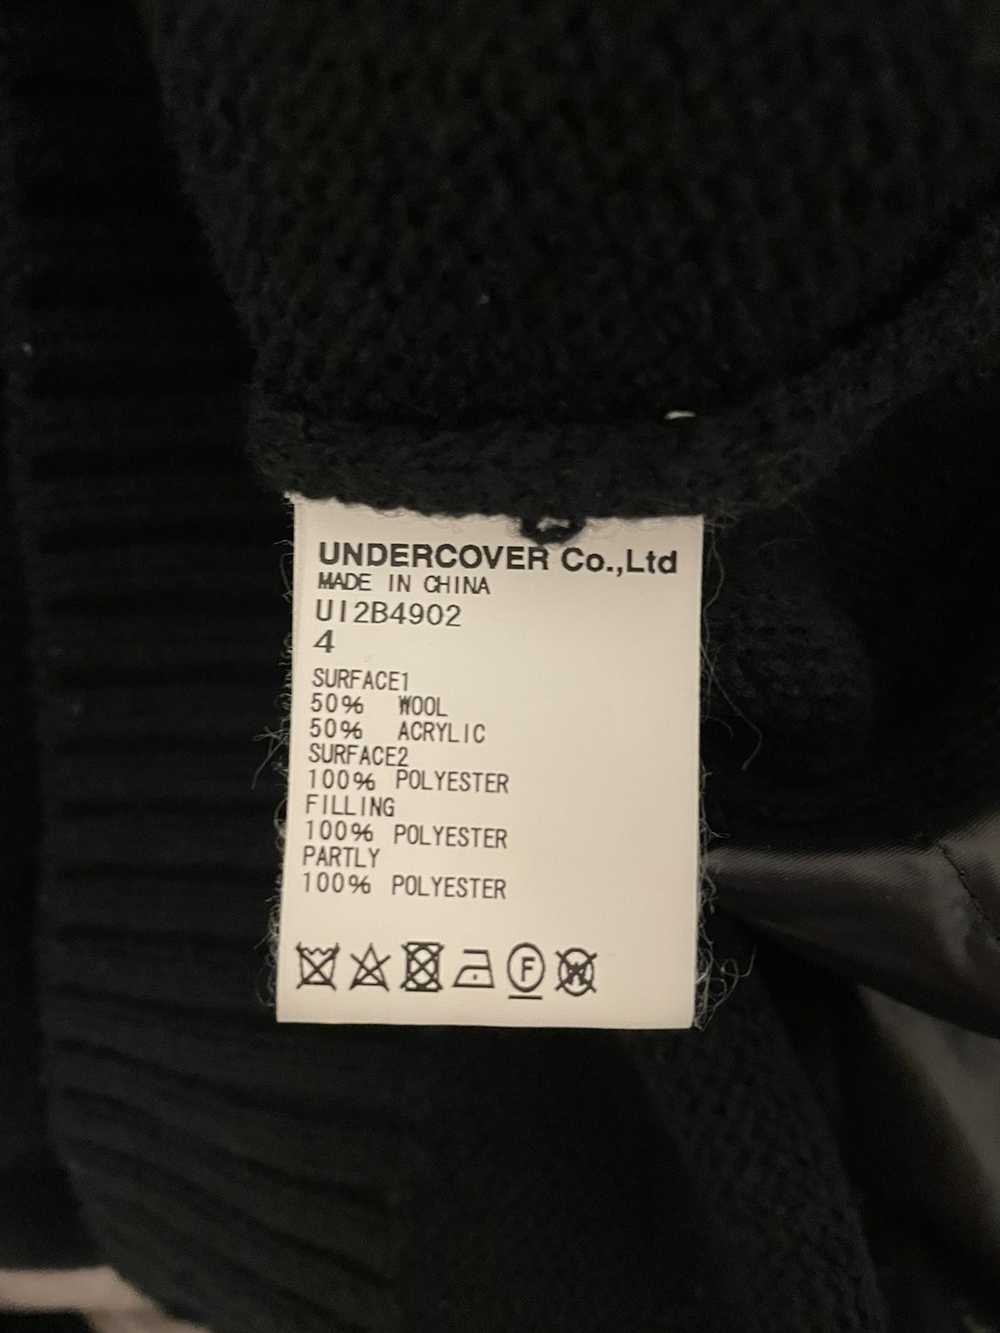 Undercover Undercoverism knit wear/sweater - image 6